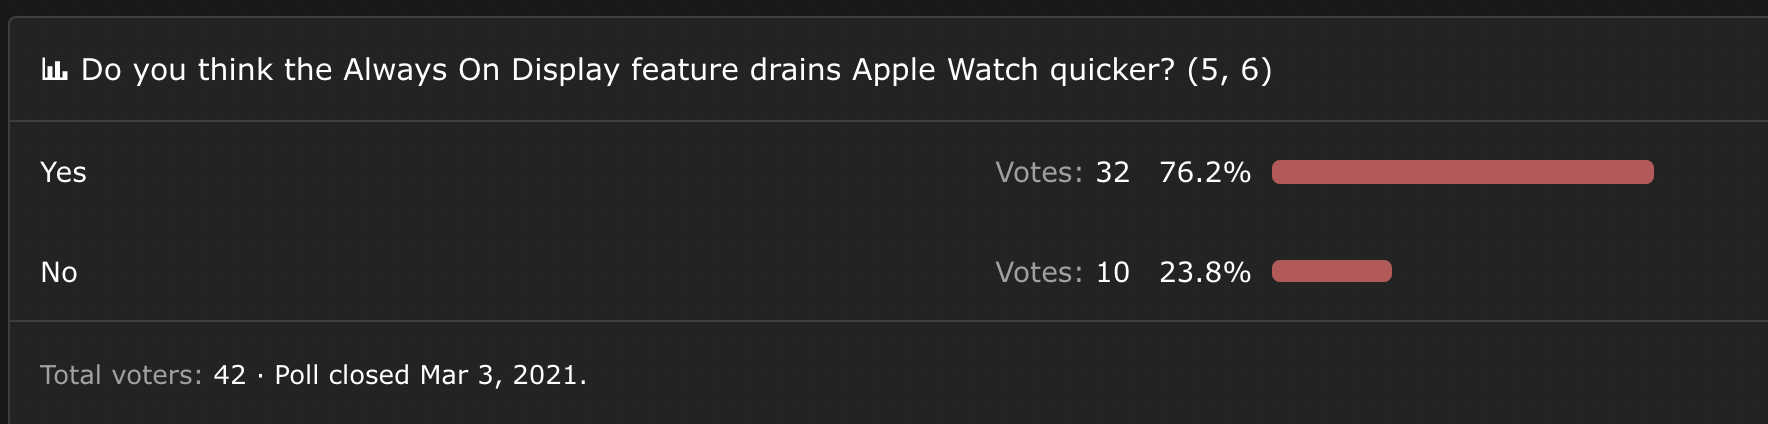 always on display on apple watch drains battery life